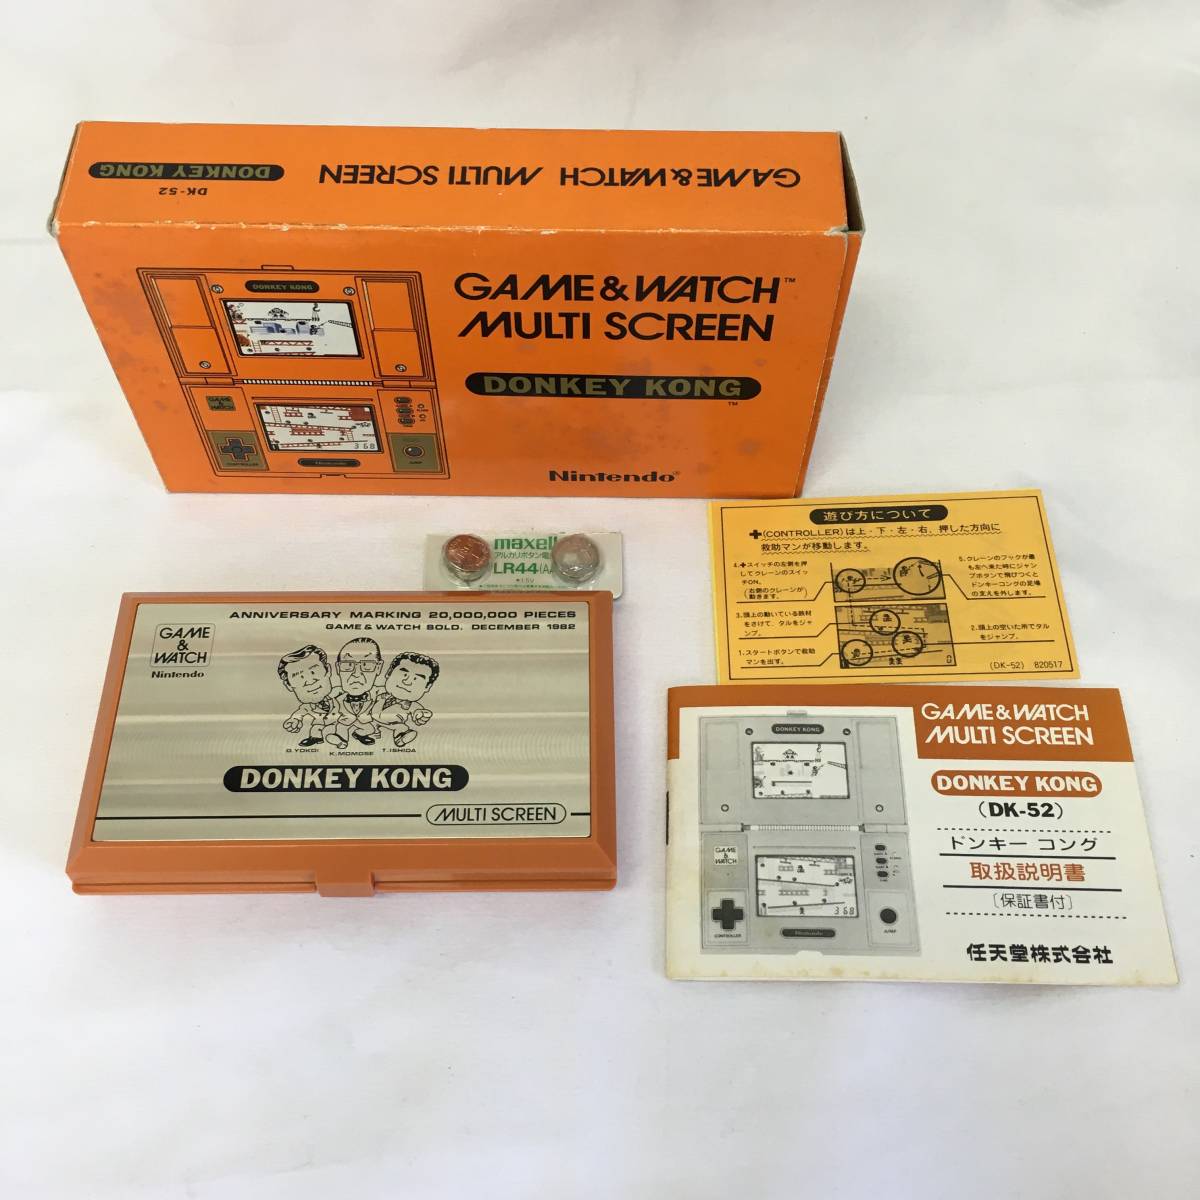 This rare Nintendo Game & Watch just broke an auction record Ars Technica